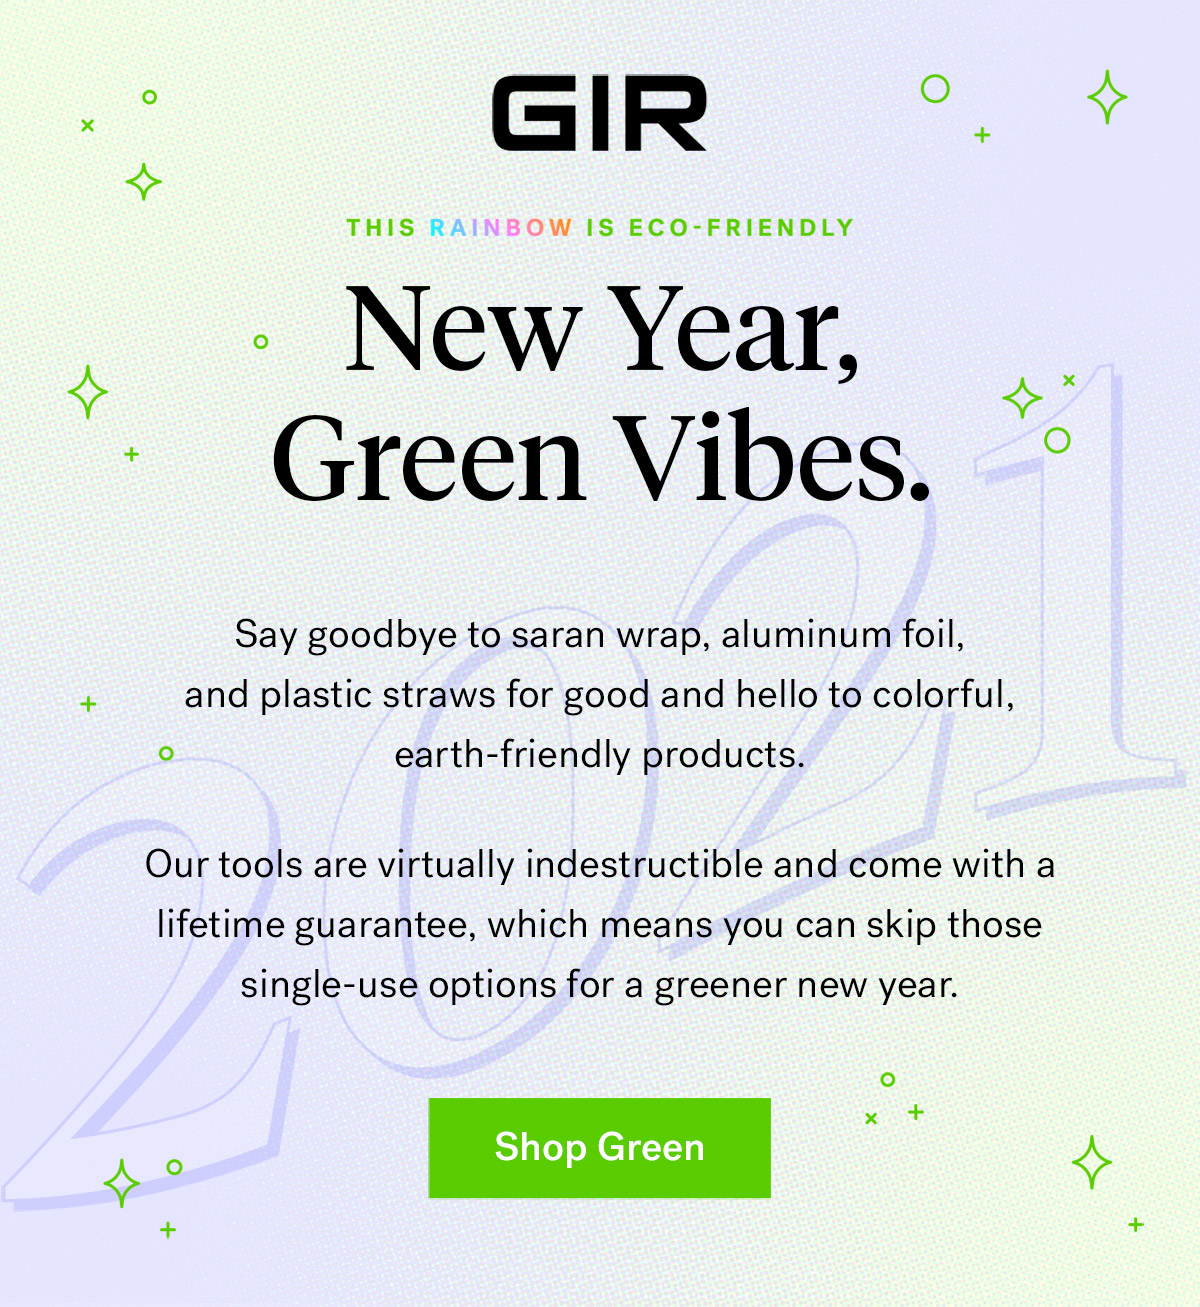 GIR: Get It Right

                                This rainbow is eco-friendly

                                New Year, Green Vibes 

                                Say goodbye to saran wrap, aluminum foil, and plastic straws for good and hello to colorful, 
                                Earth-friendly products. Our tools are virtually indestructible and come with a lifetime guarantee,
                                which means you can skip those single-use options for a greener new year.

                                Shop Green

                                